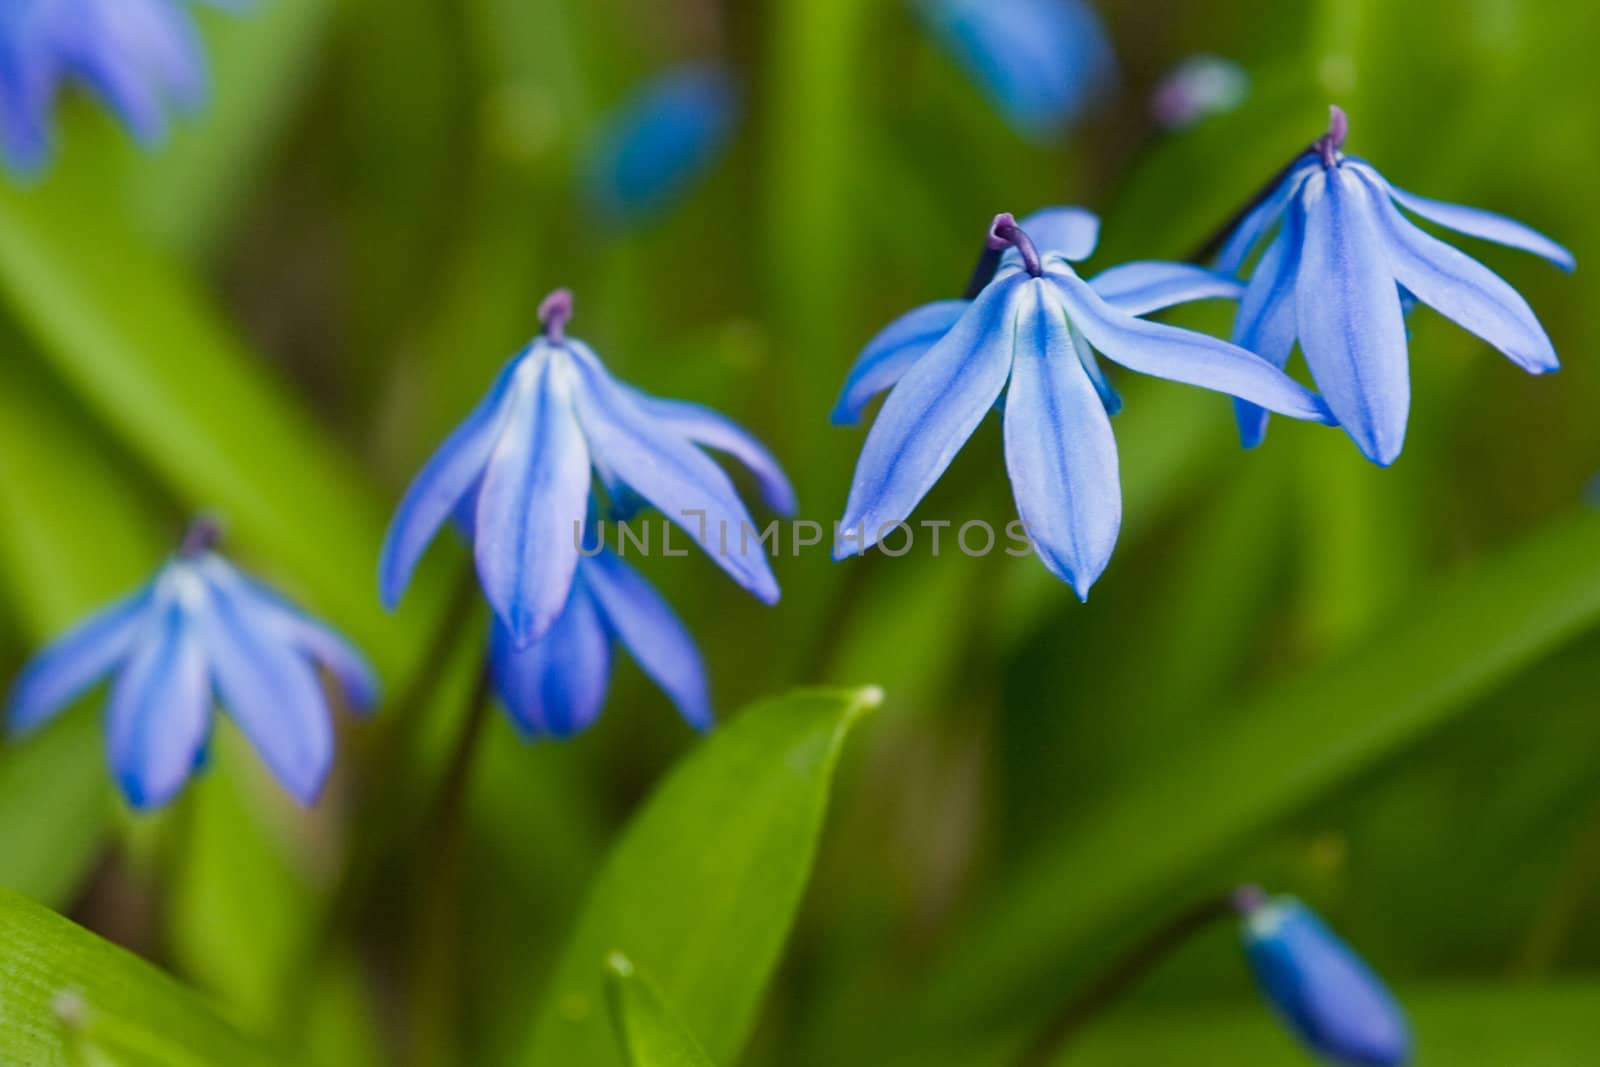 A group of fresh blue snowdrops, macro